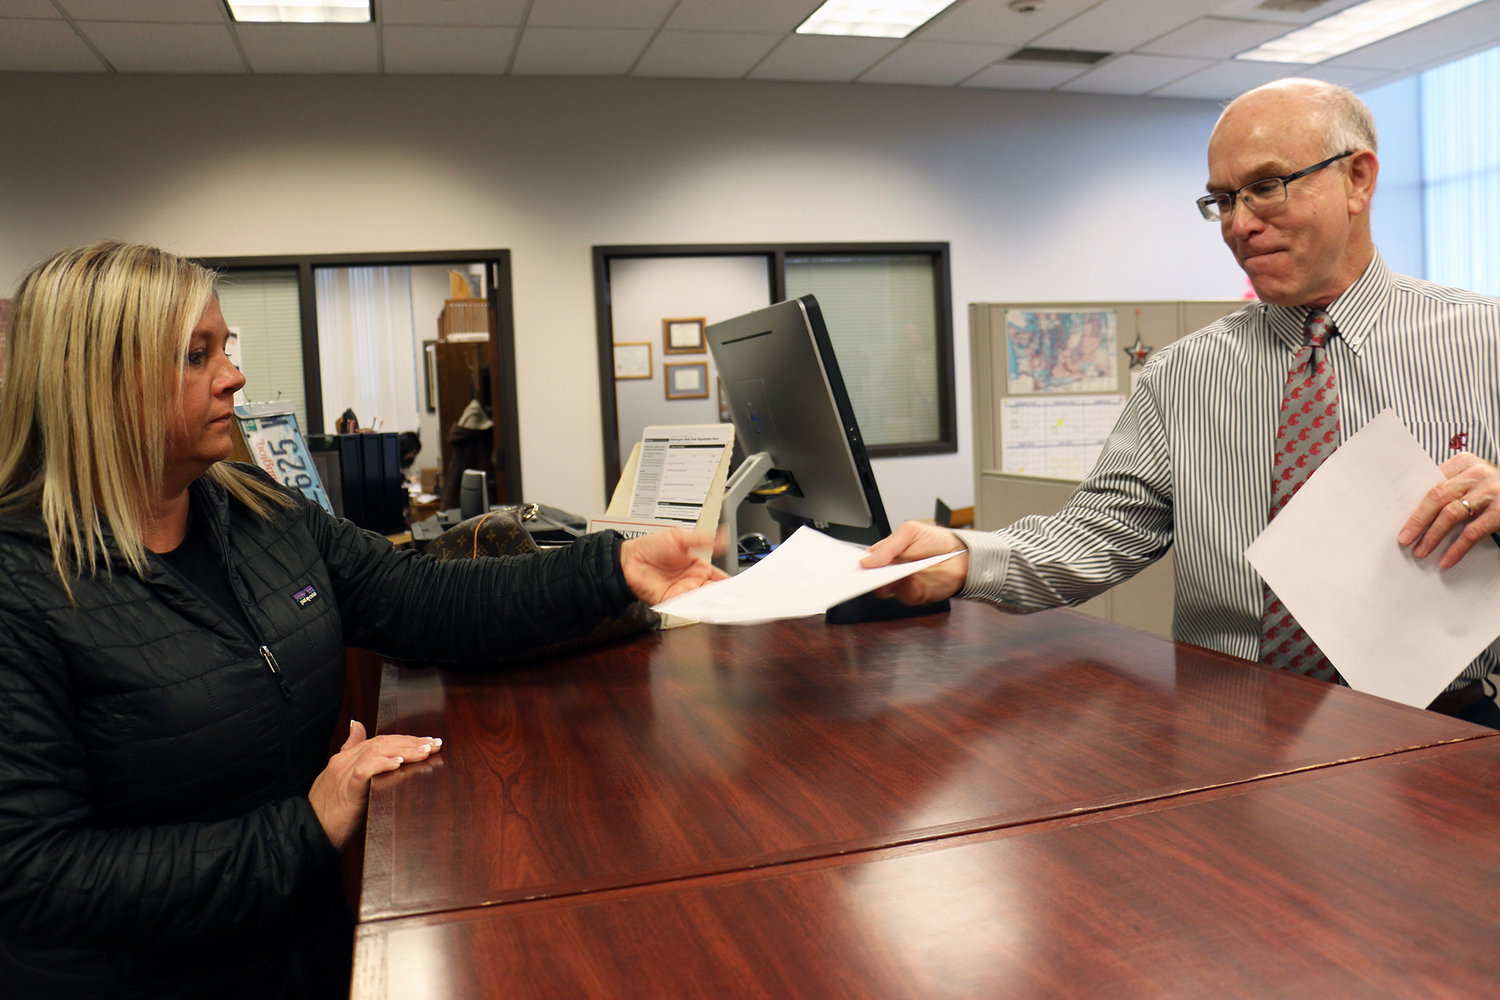 Auditor Larry Groves gives Coralee Taylor her receipt after One Lewis County turned in stacks of petitions. The signatures will be validated by the auditor’s office.